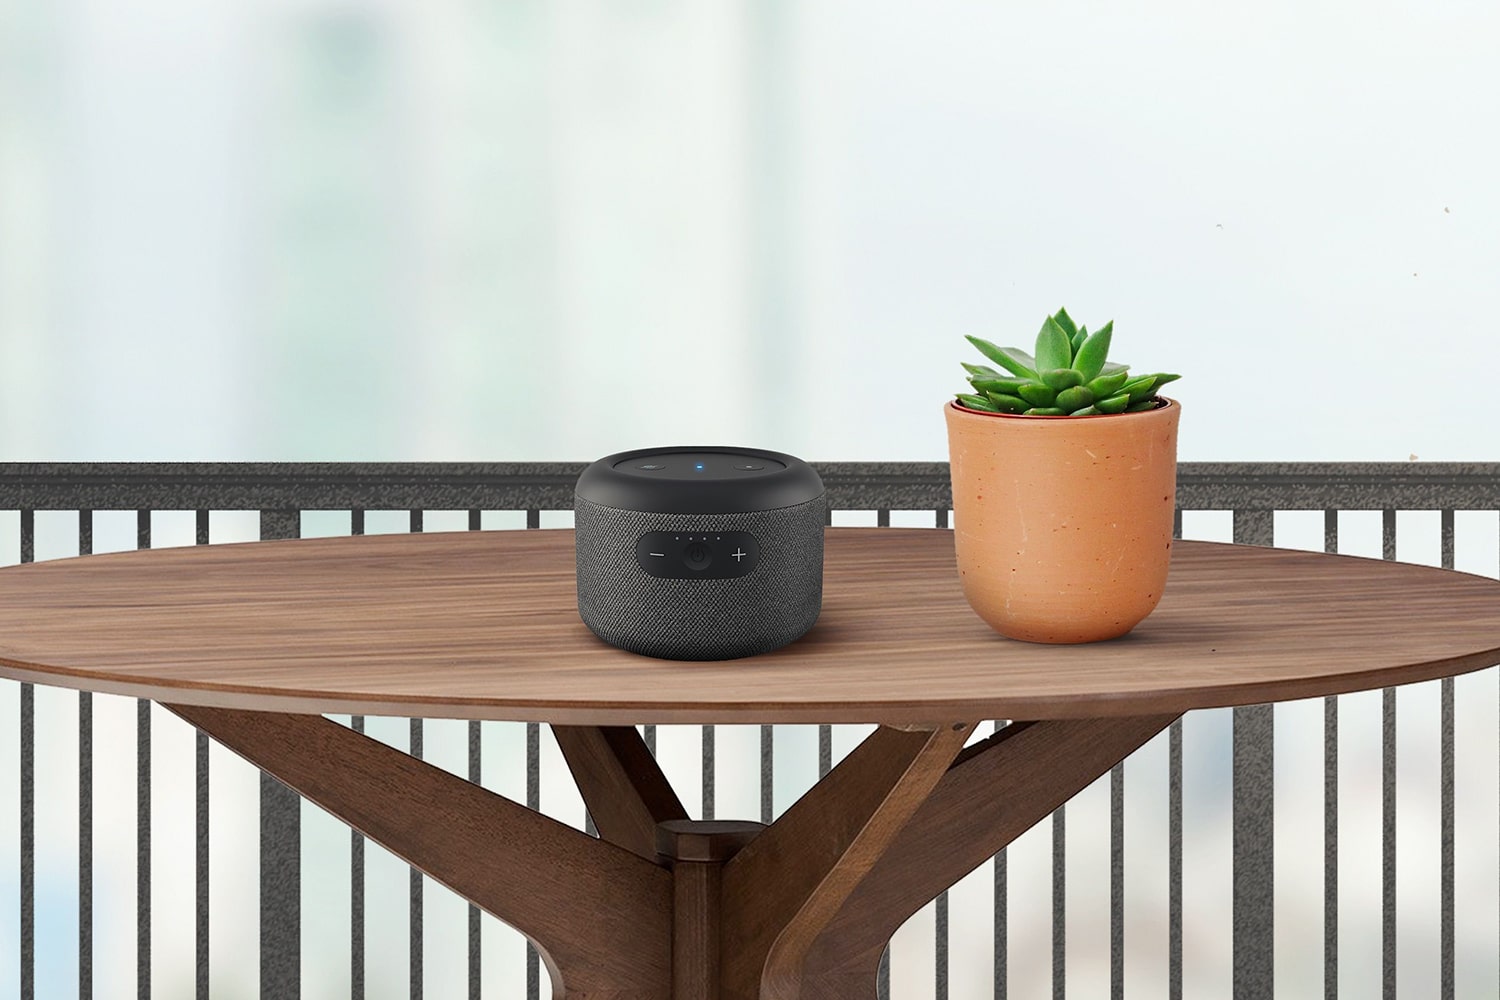 Echo Input Portable Smart Speaker Edition - Carry Echo anywhere in your home. Credit: Amazon